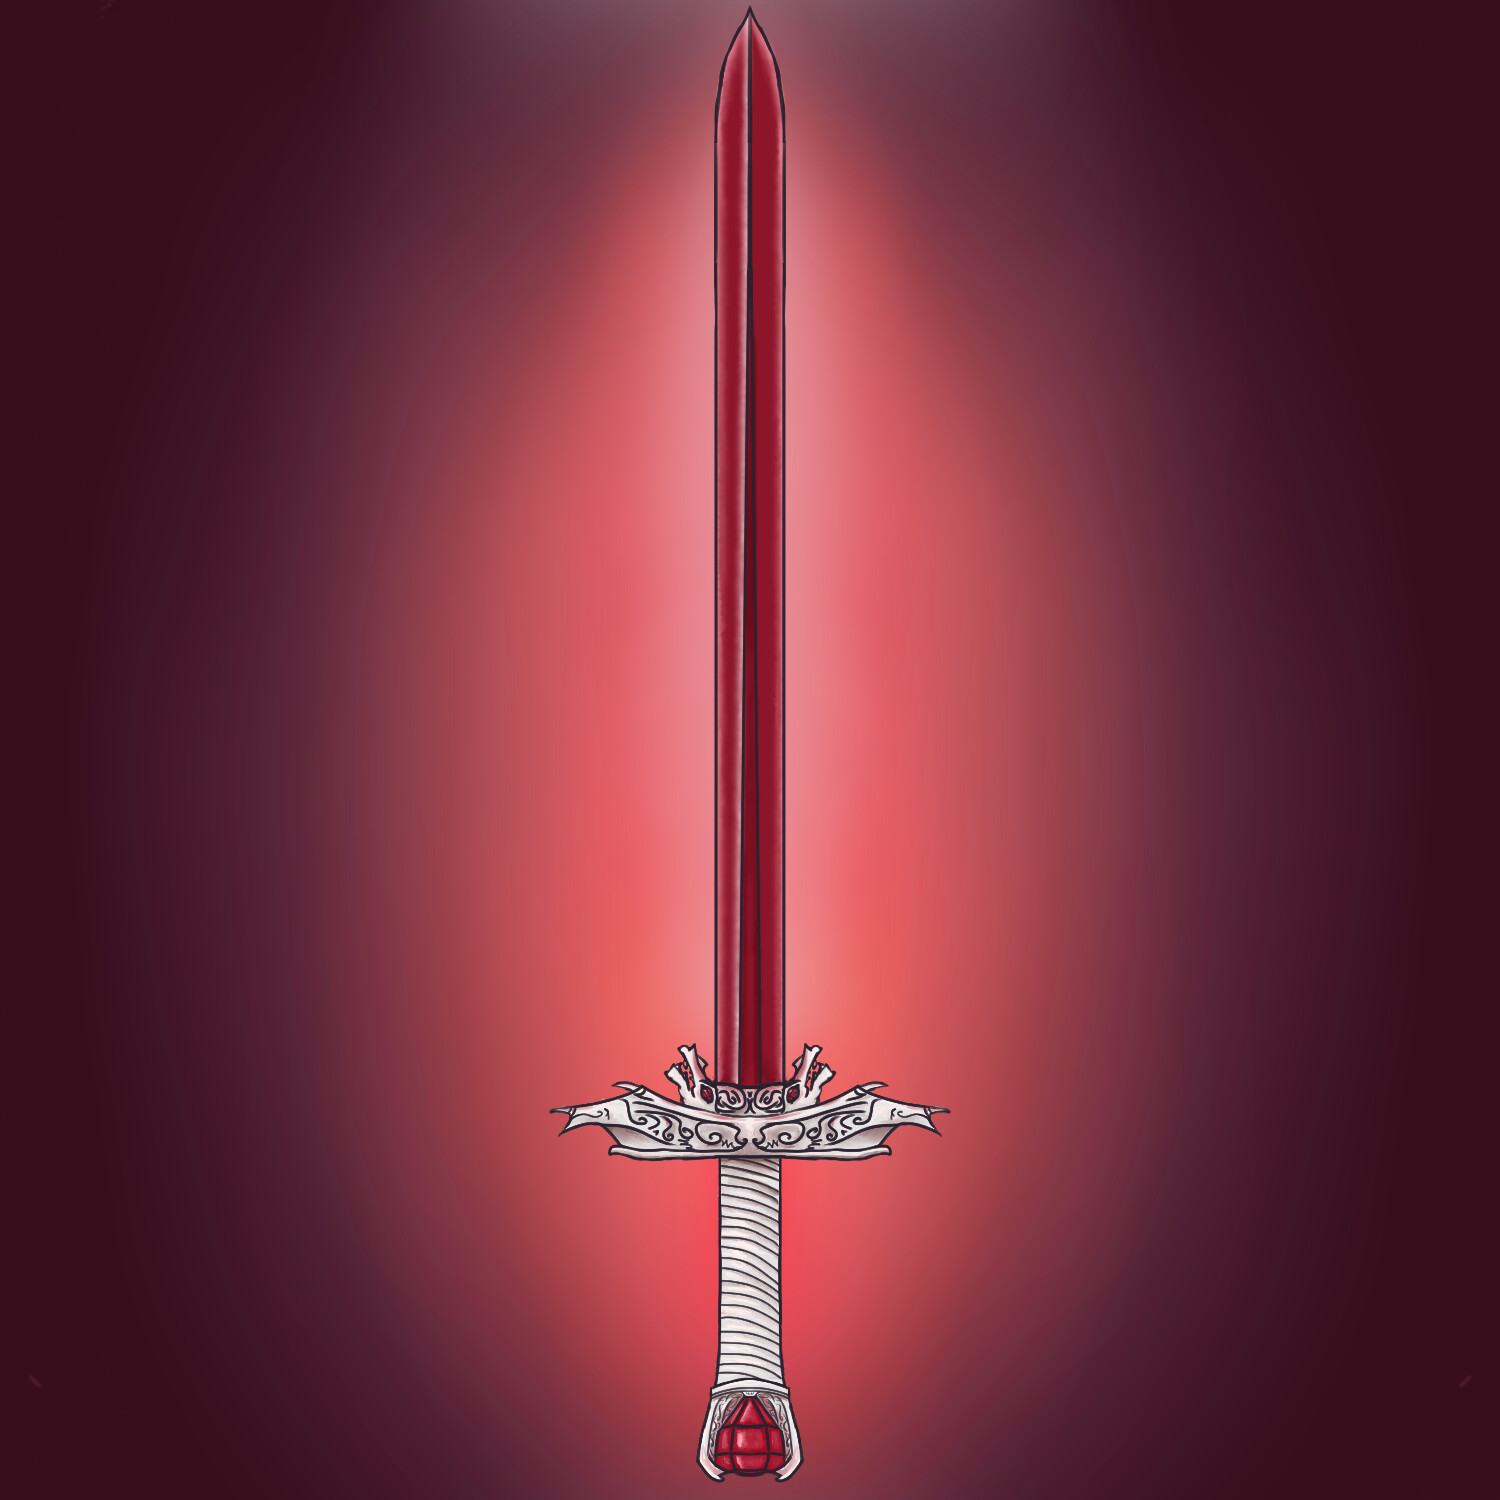 Dragonslayer - this is a design based on the description of Zar’roc, the blood-red sword from Eragon